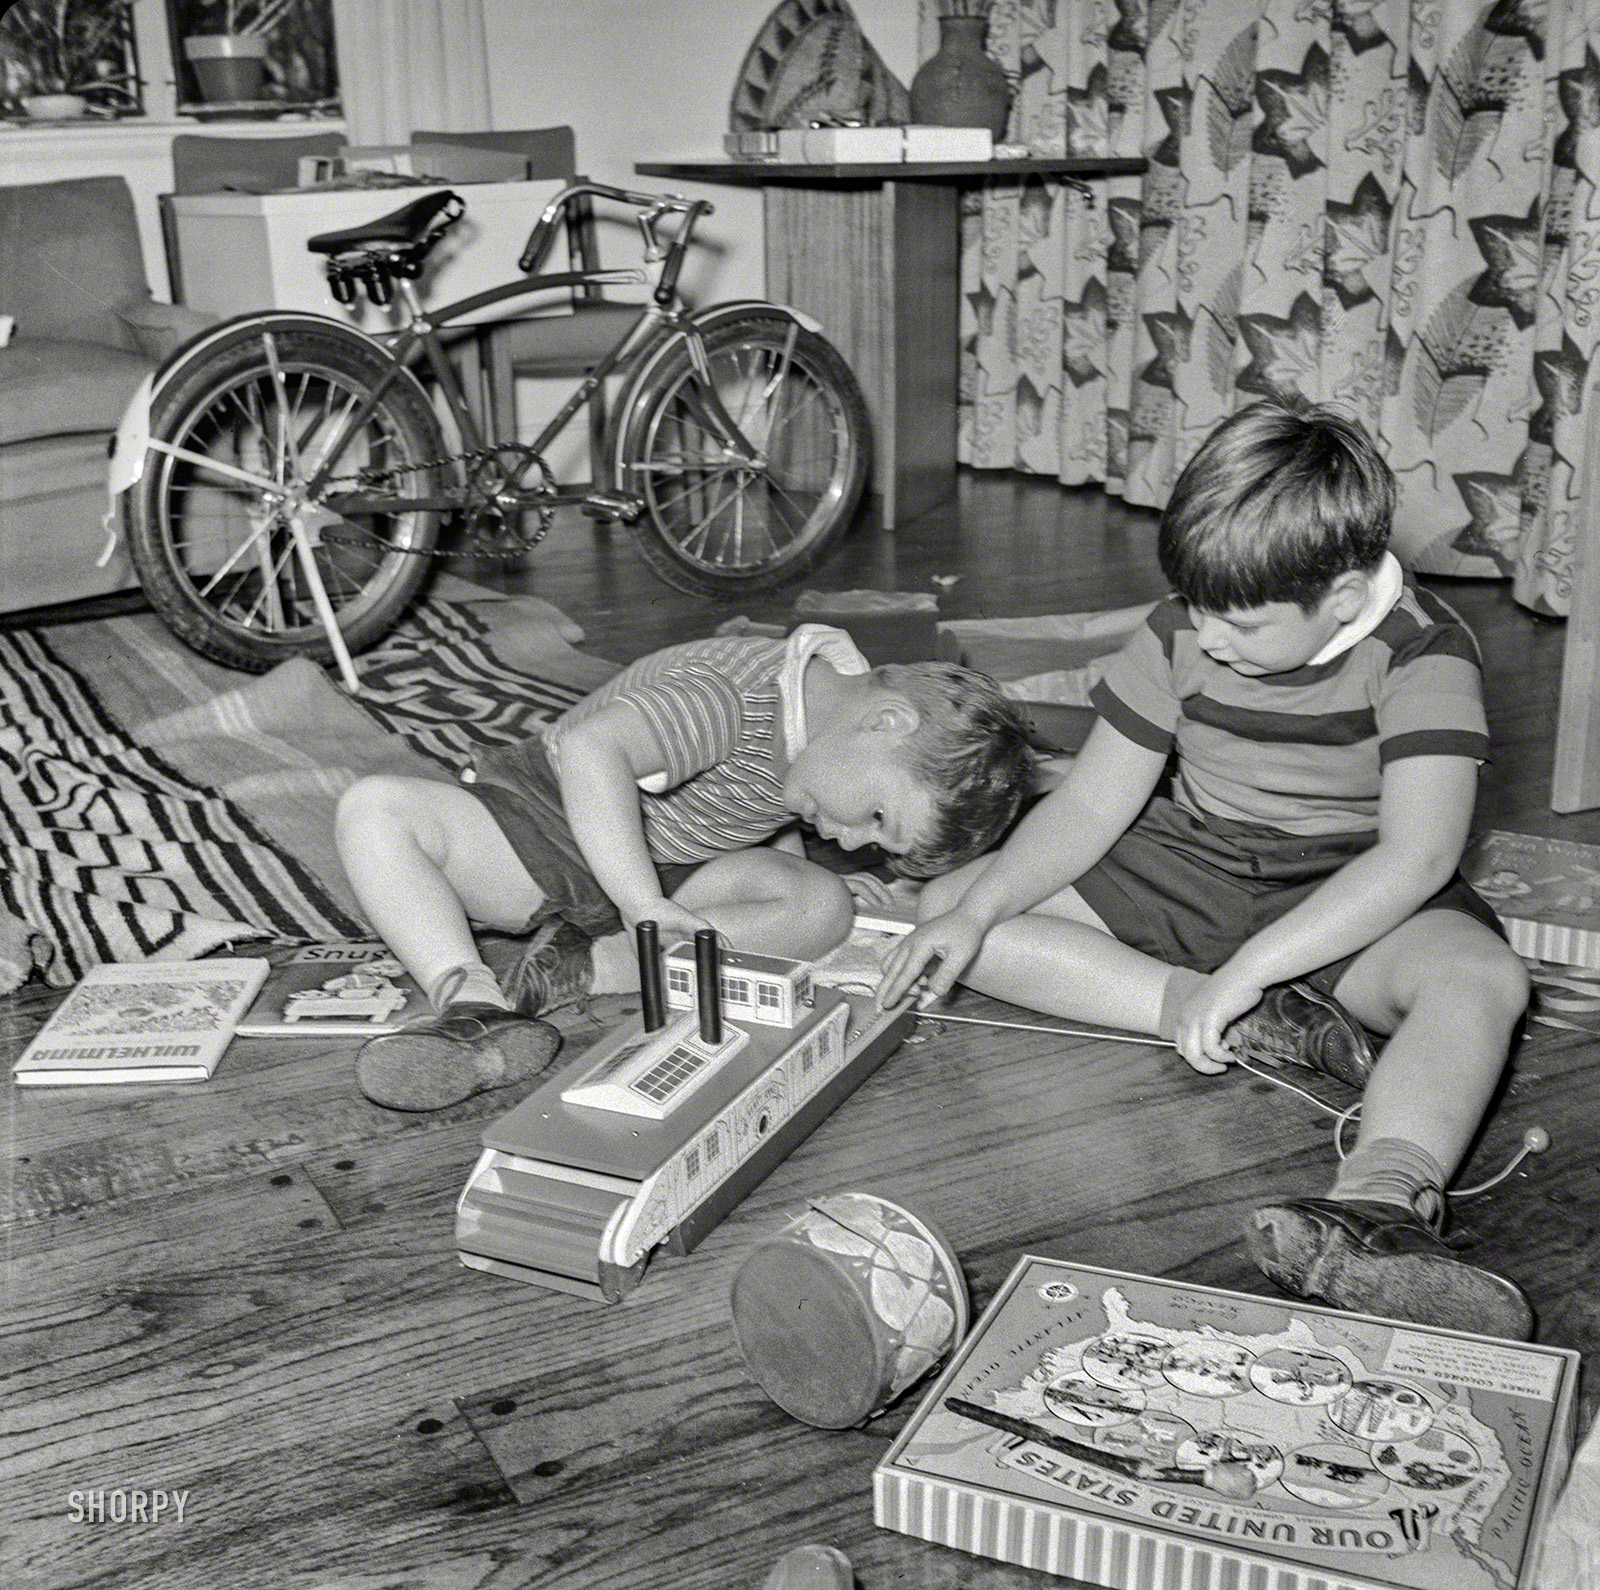 December 1941. "Christmas in the home of a government executive in Virginia." Photo by John Collier taken in the home of his brother, Department of Agriculture official Charles Wood Collier. The boys are Charles's sons Lionel (Leo) and Charles Rawson Collier. View full size.